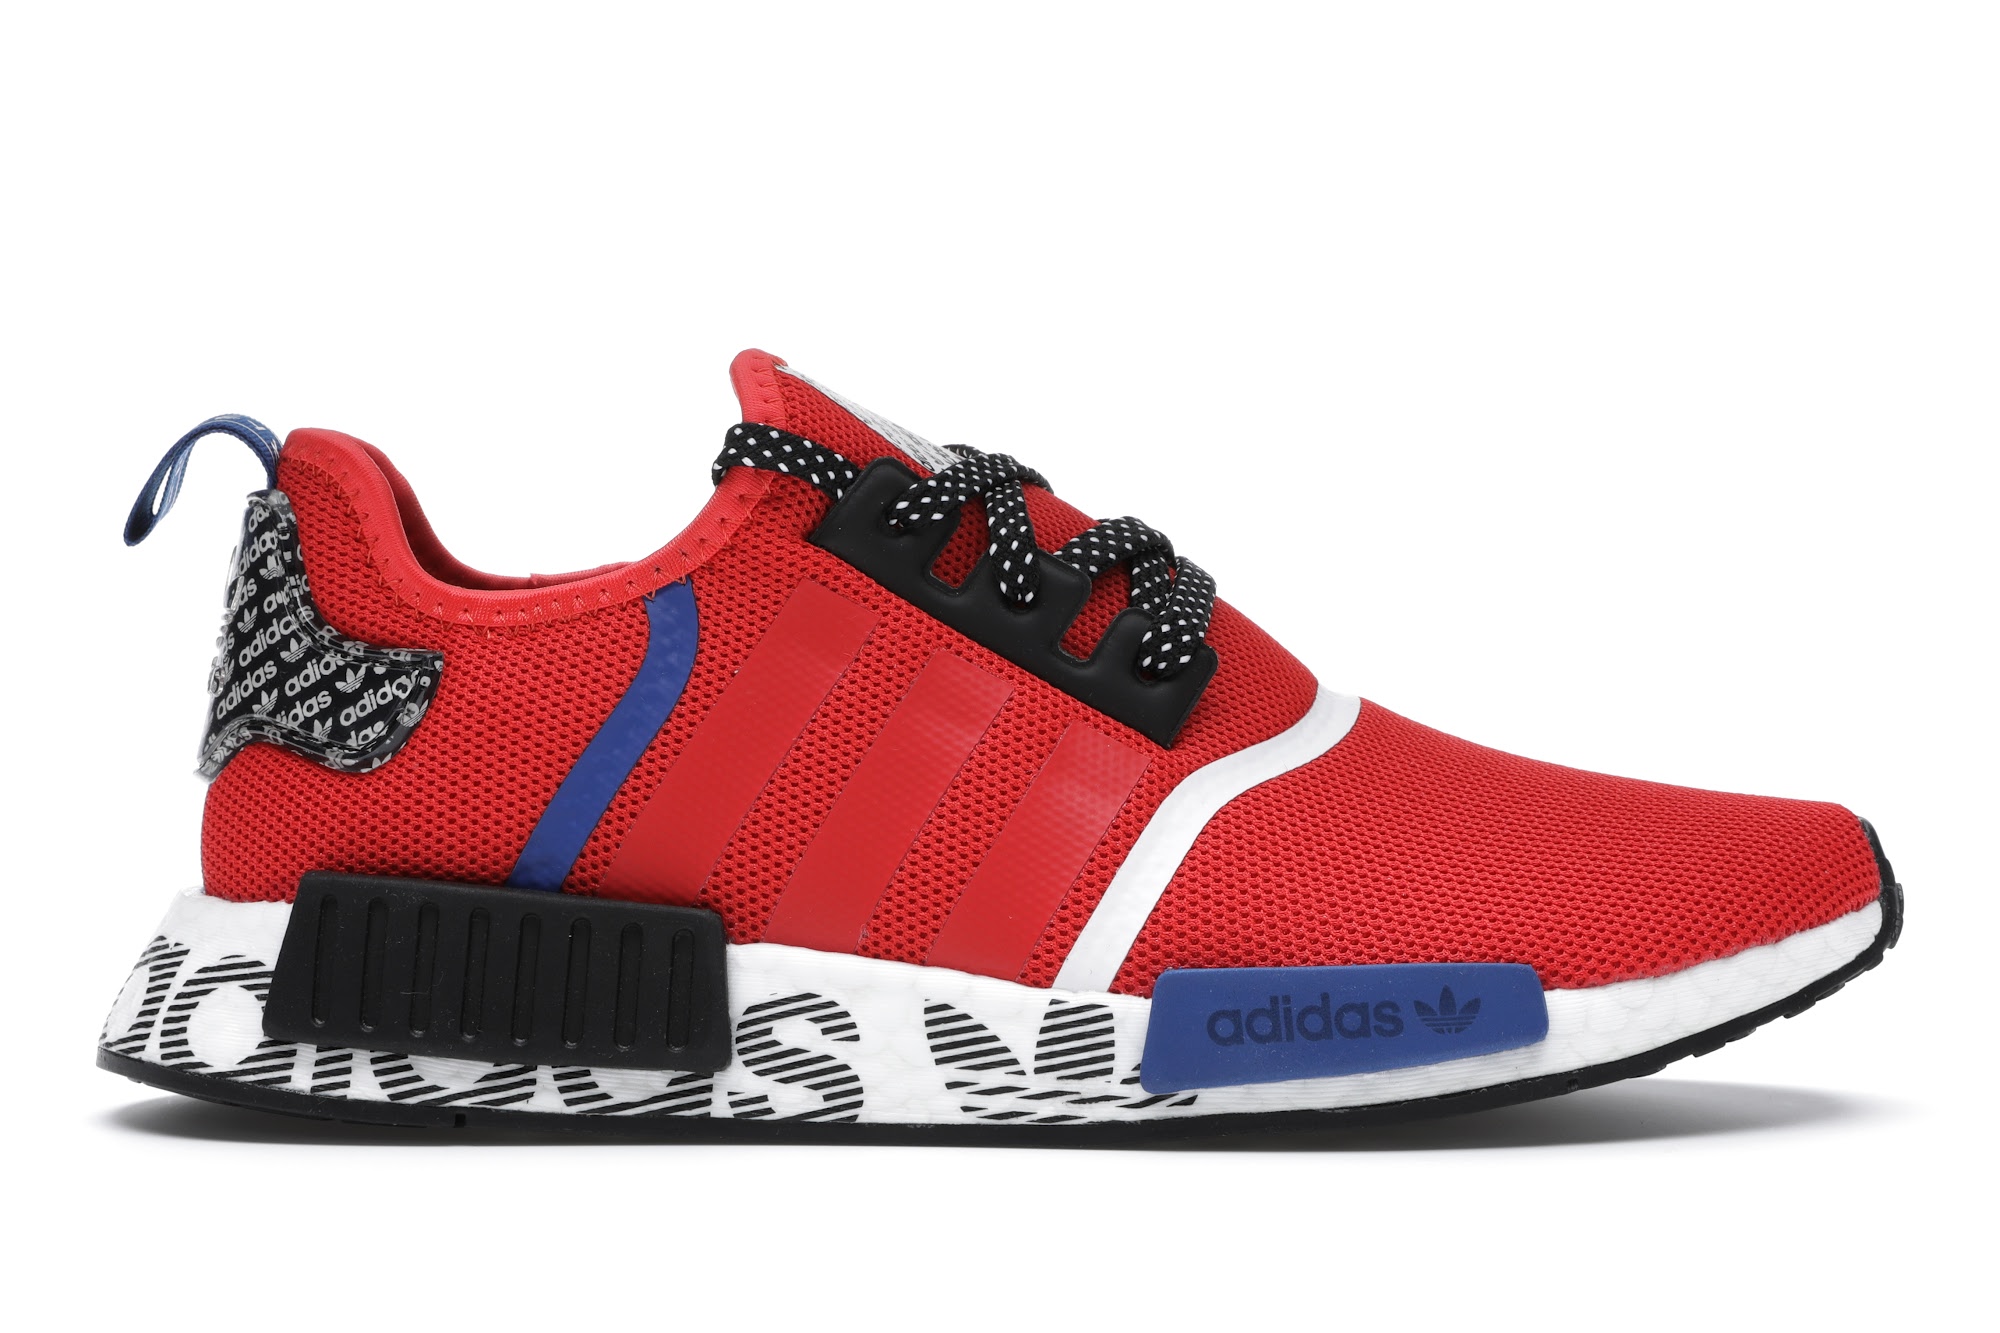 adidas nmd blue and red